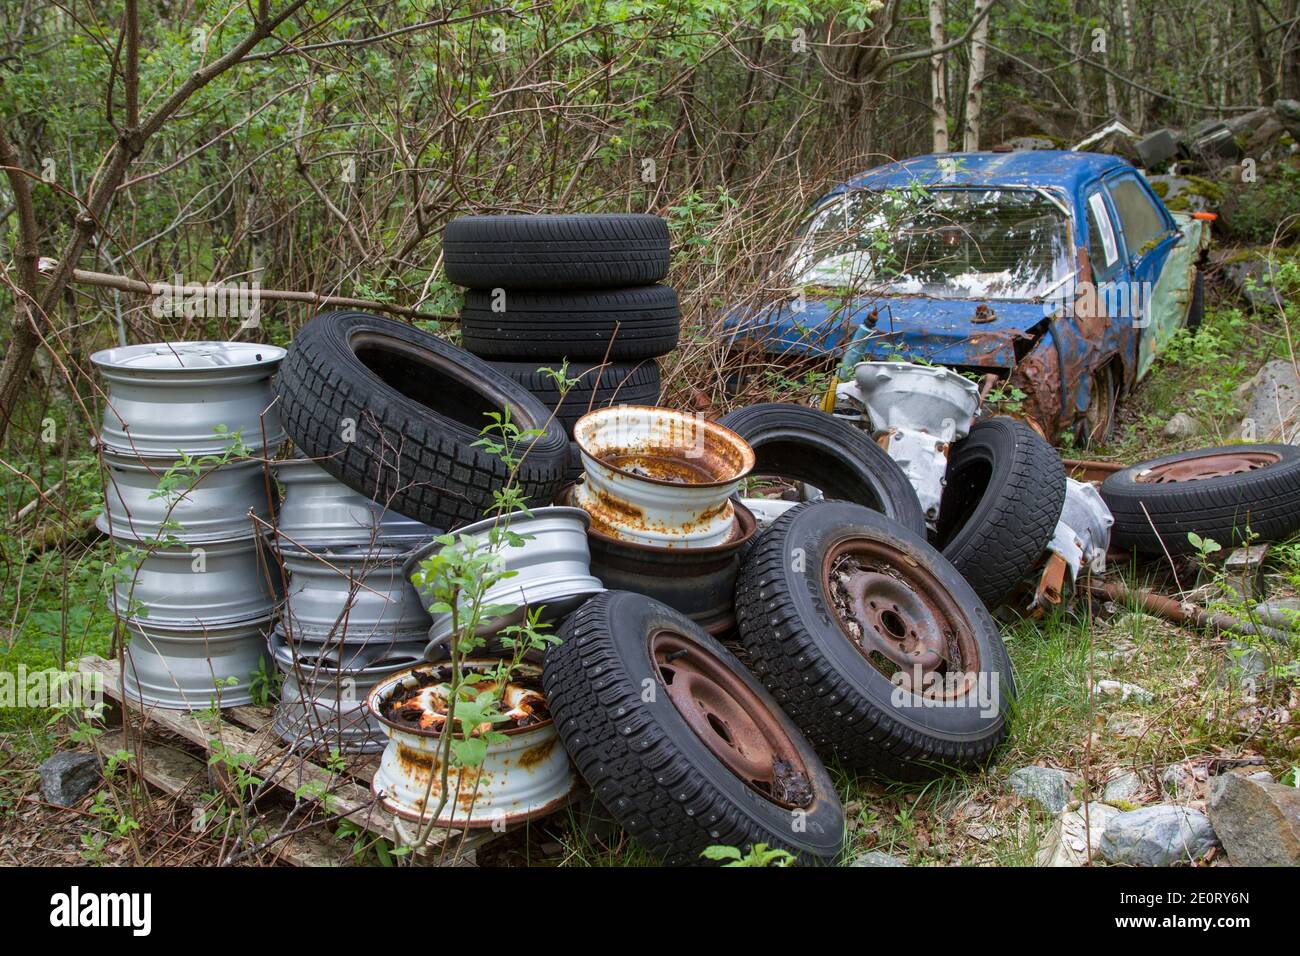 One Problem That You Come Across Again And Again In The Beautiful Landscape Of Norway Is The Wild Disposal Of Bulky Waste And Scrap Vehicles Stock Photo